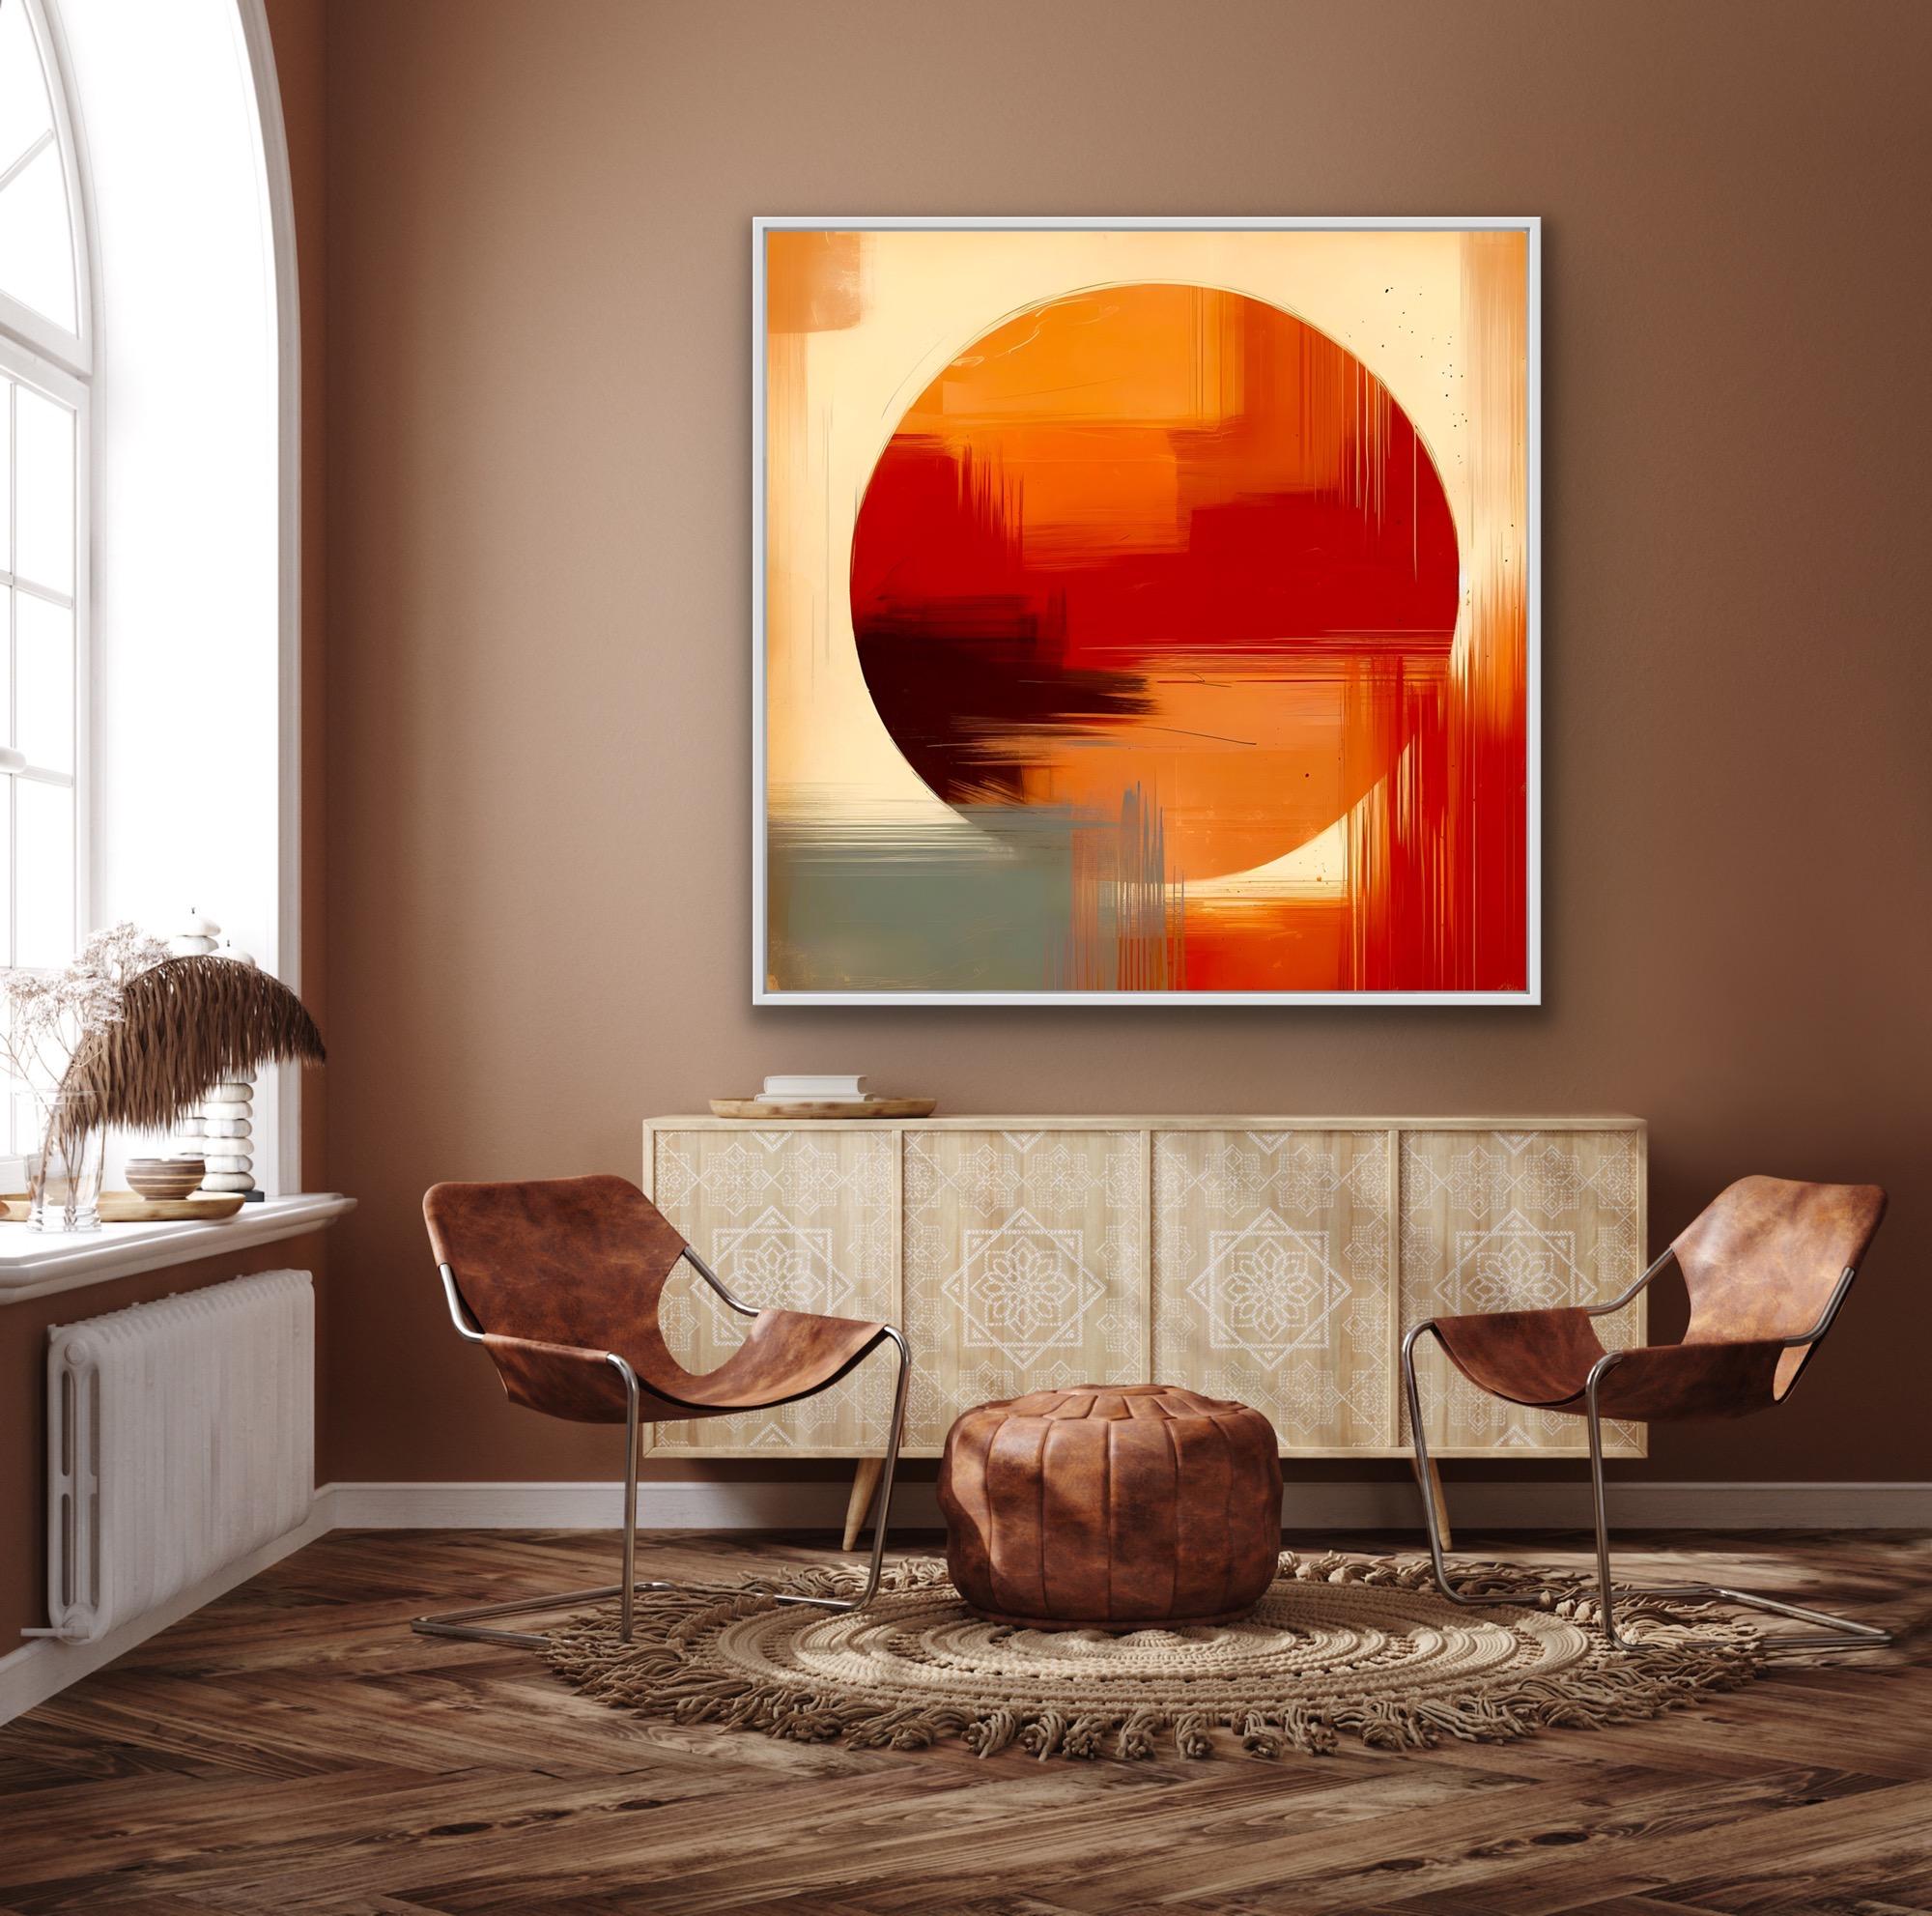 Liavis, Original Digital painting, Abstract Expressionism, Orange circle, Modern - Painting by Agent X